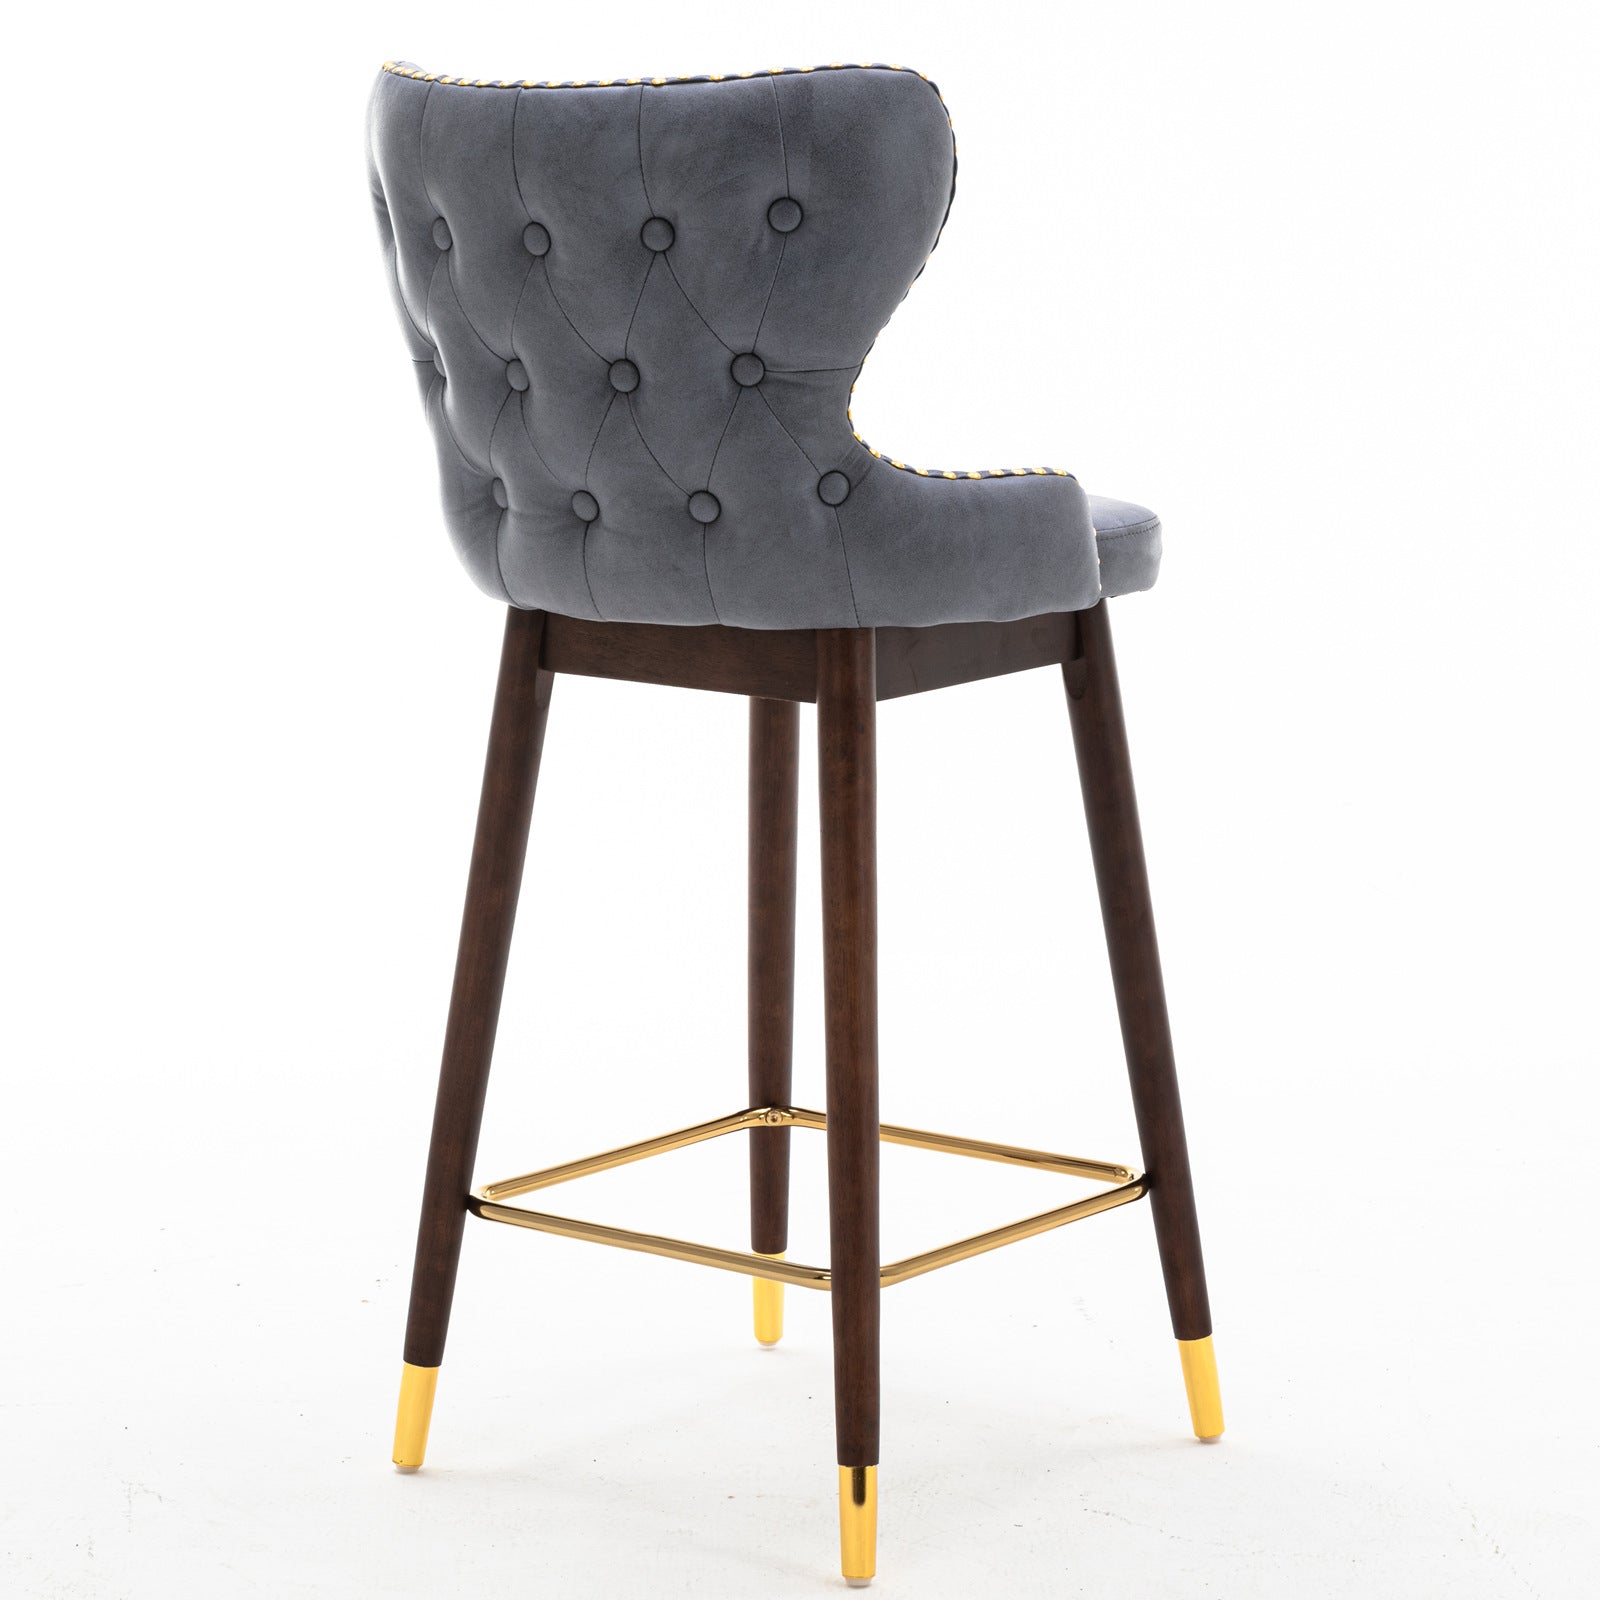 ZNTS A&A Furniture,29.9" Modern Leathaire Fabric bar chairs, Tufted Gold Nailhead Trim Gold Decoration W114342361